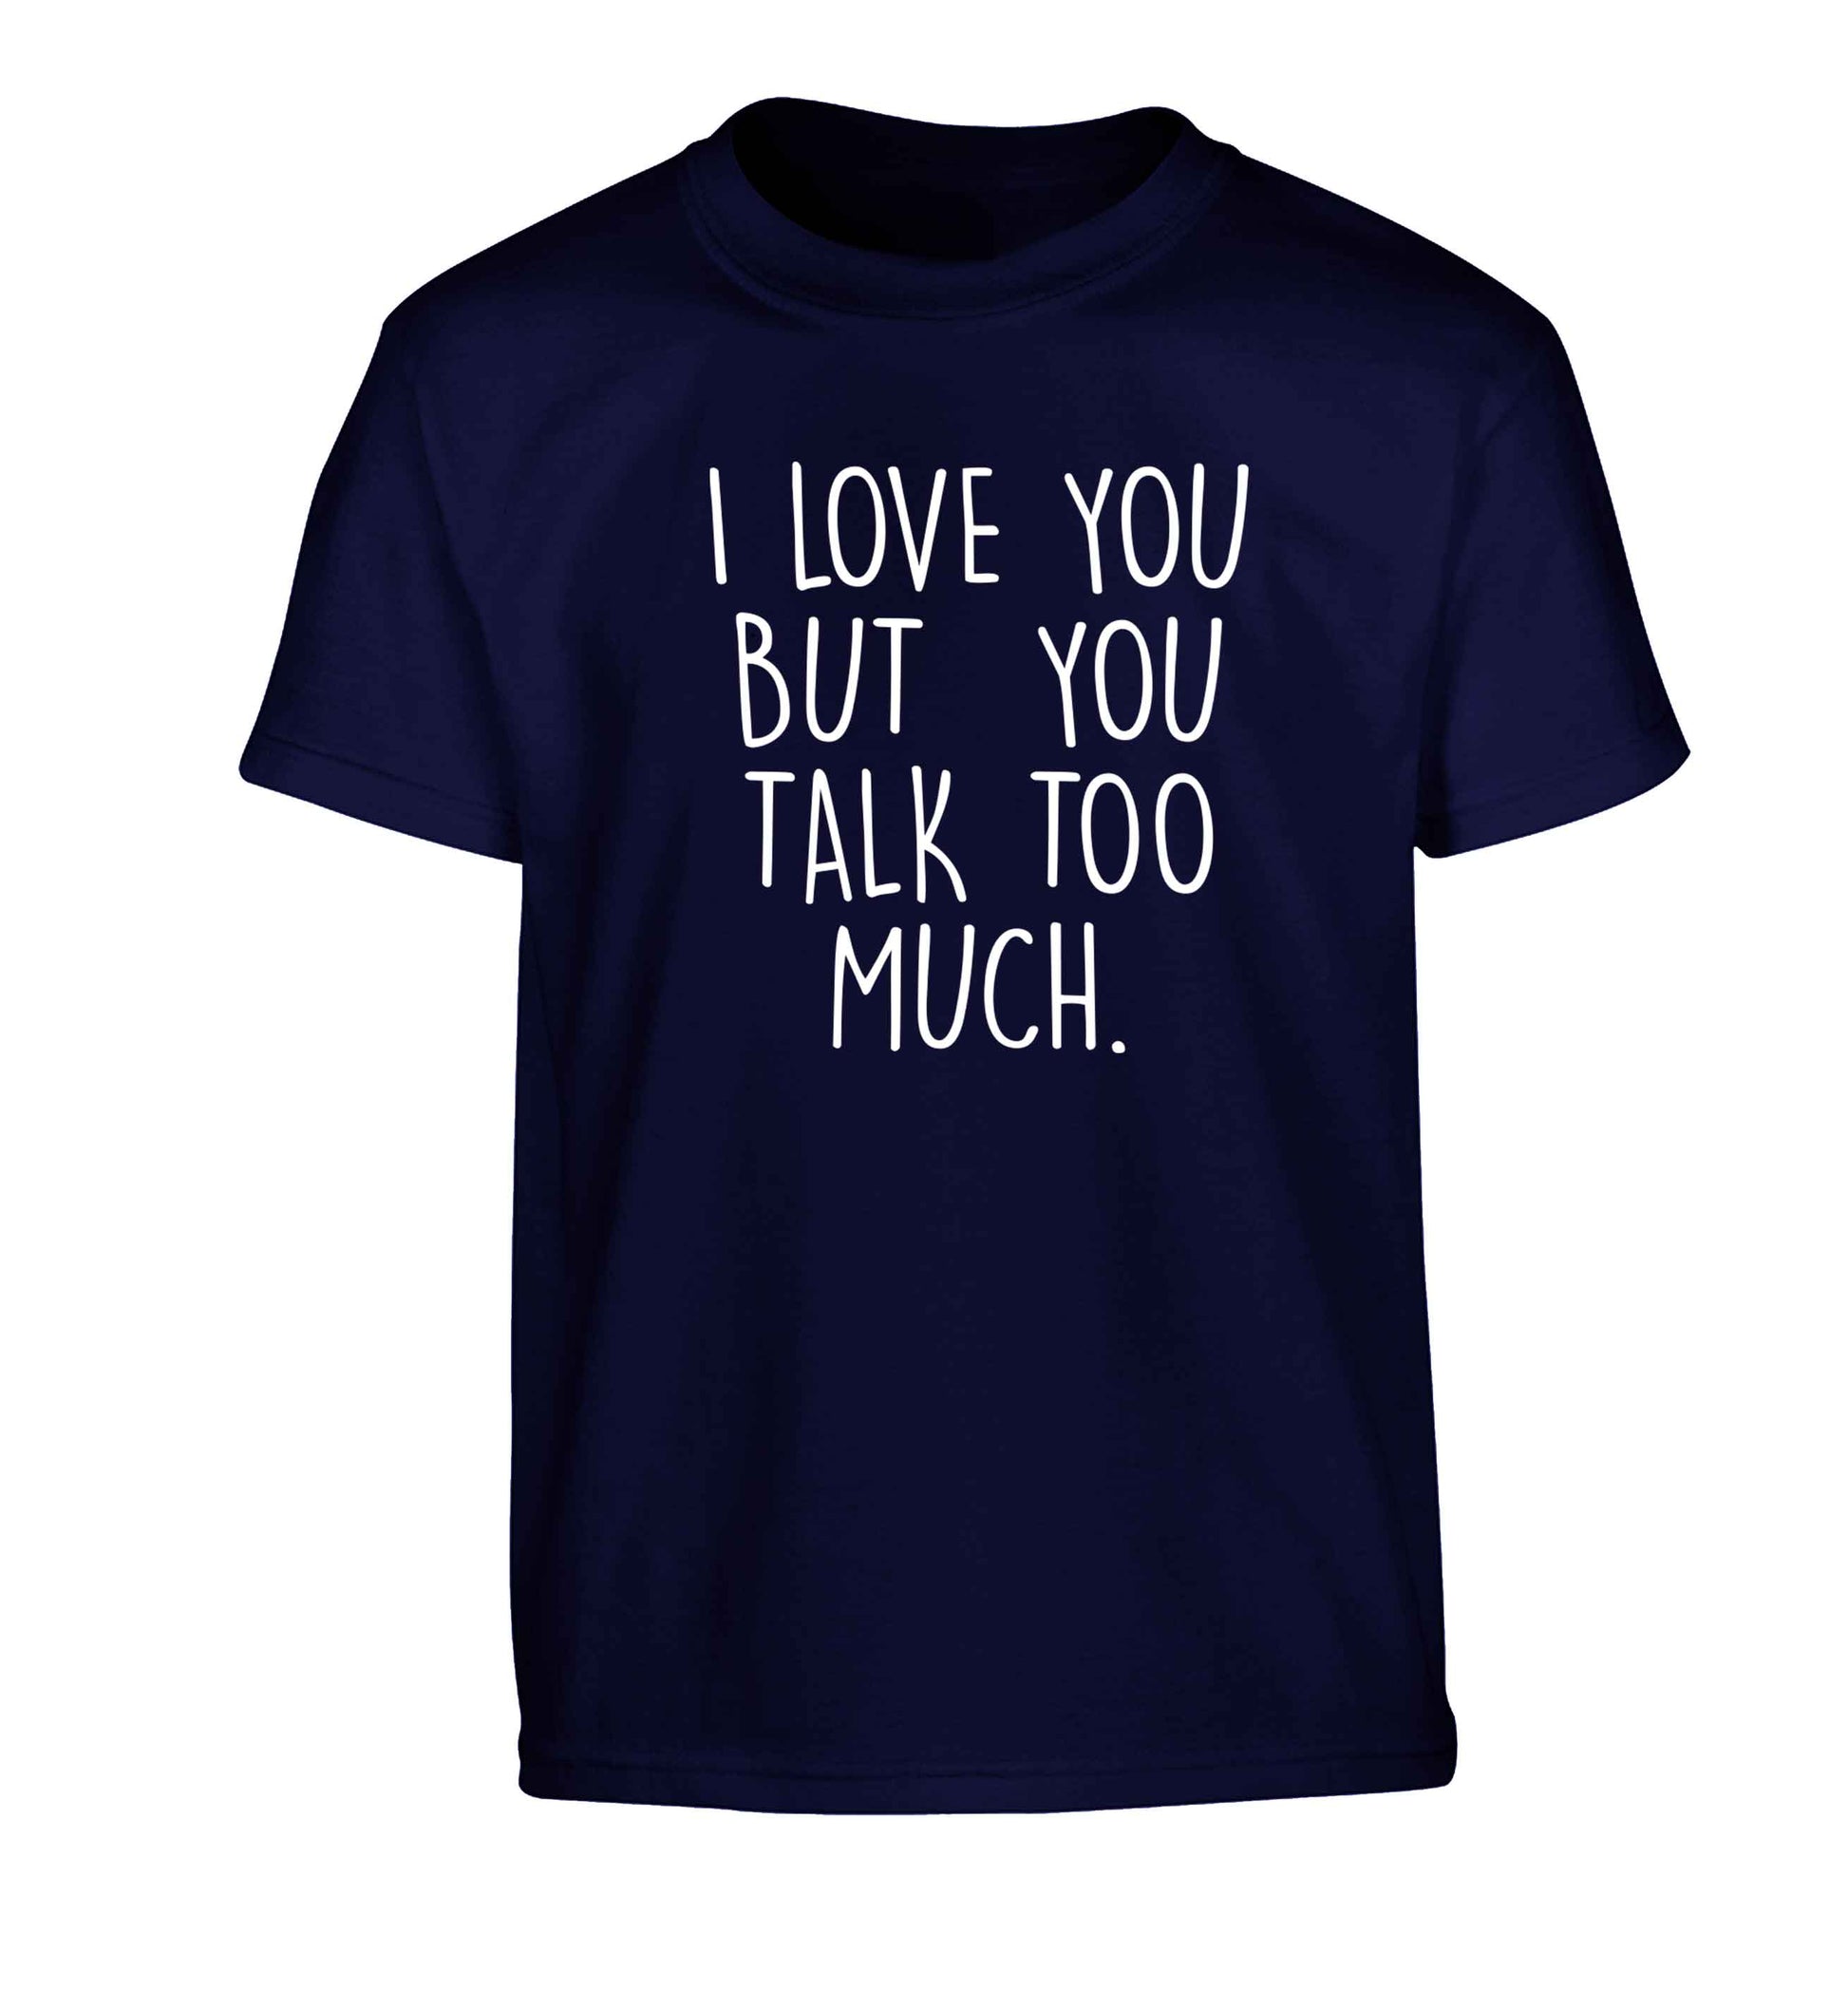 I love you but you talk too much Children's navy Tshirt 12-13 Years